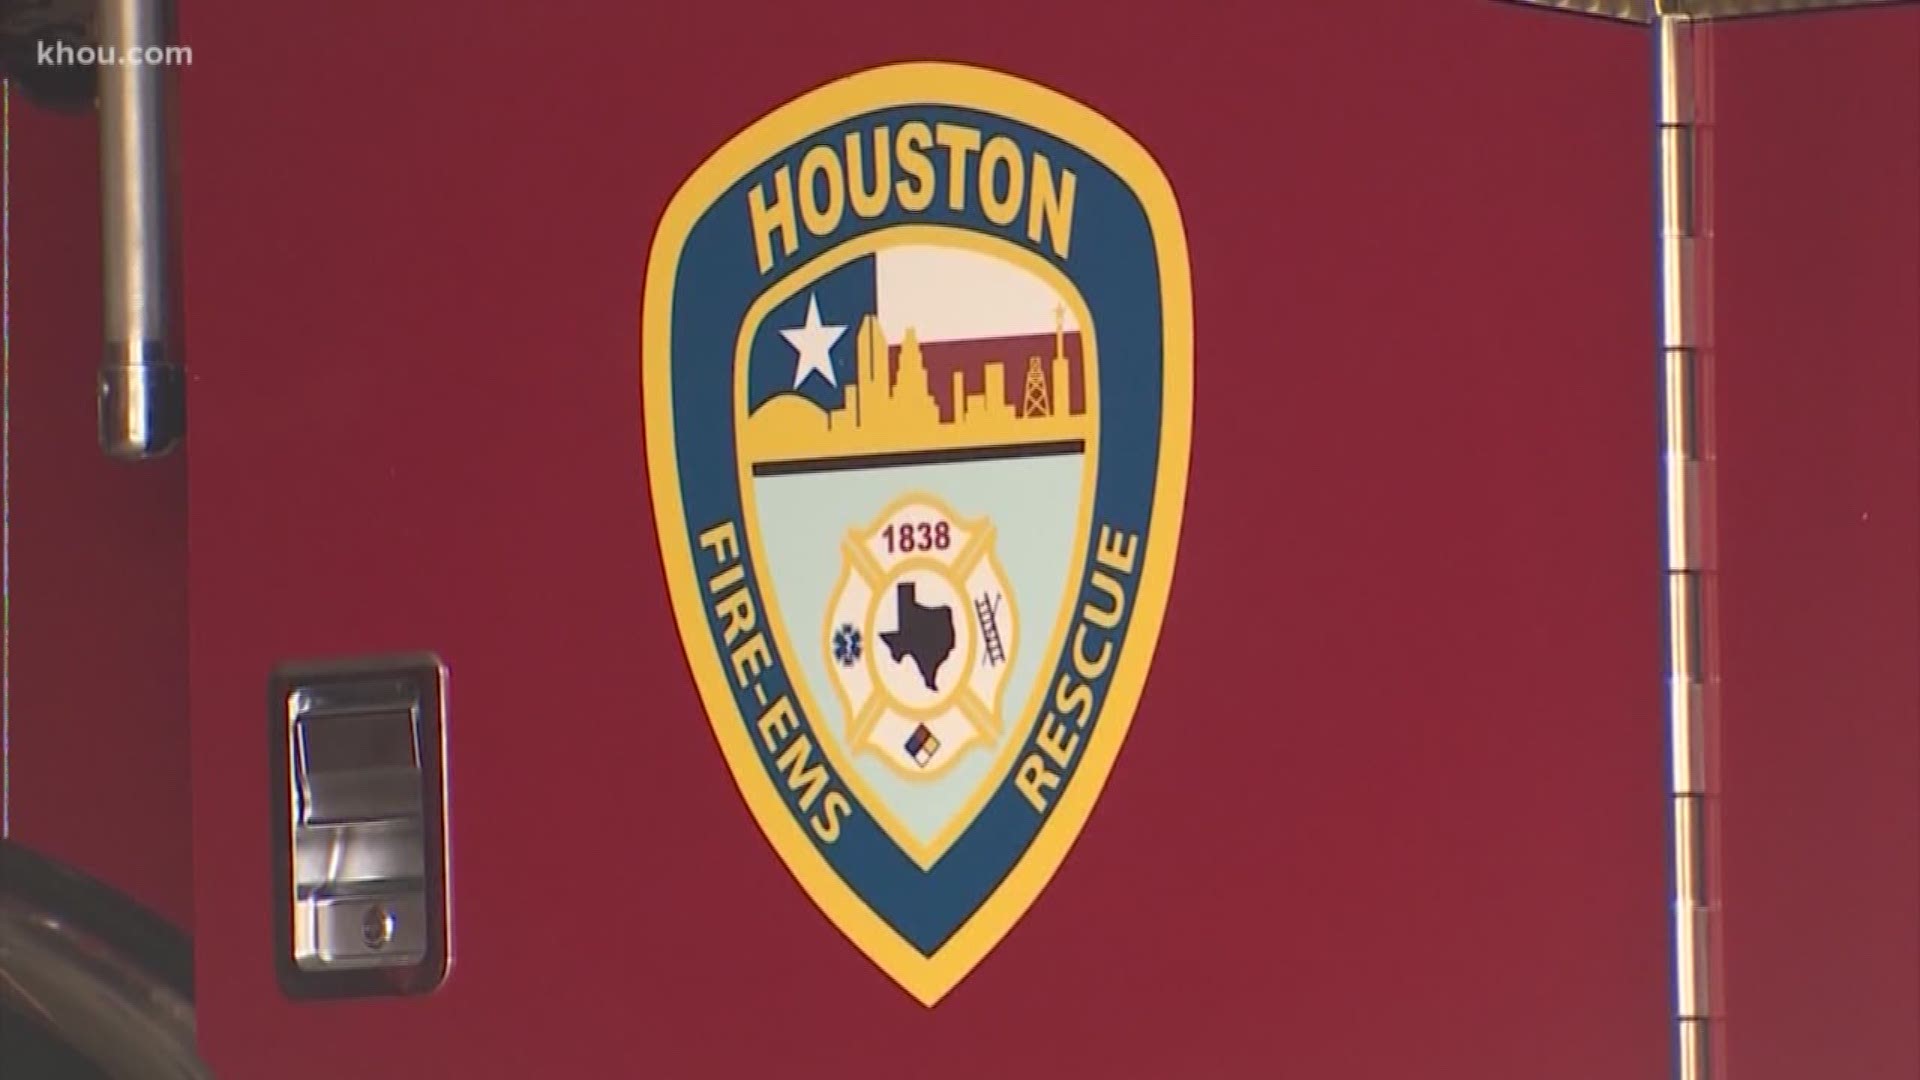 Voters last night approved a 29-percent pay raise for Houston firefighters. But Mayor Turner warns of upcoming layoffs and slower response times.